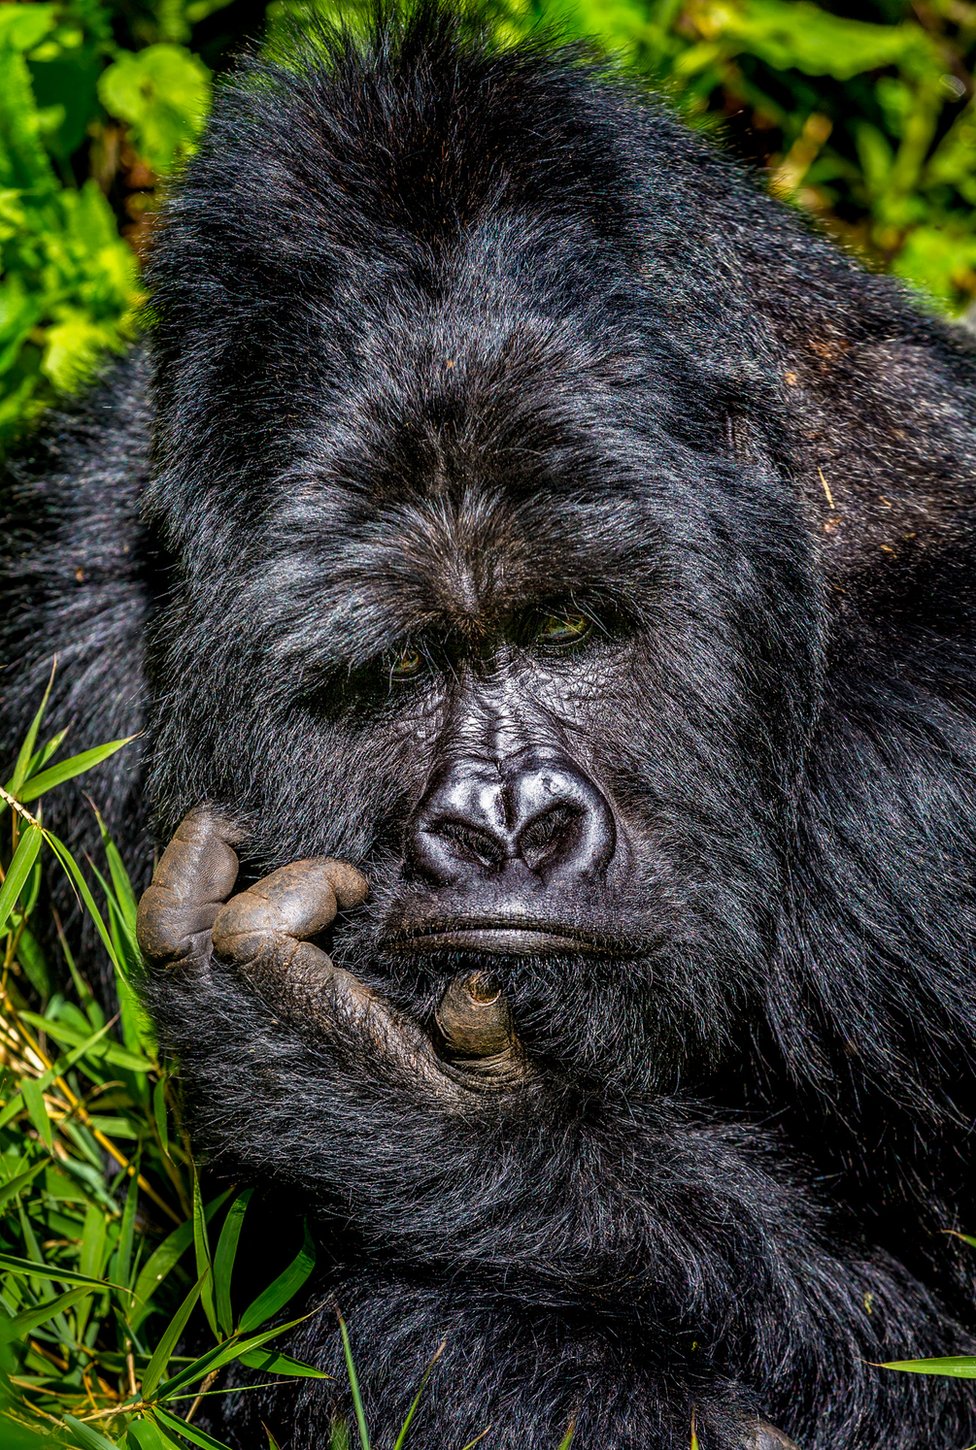 A gorilla looking bored